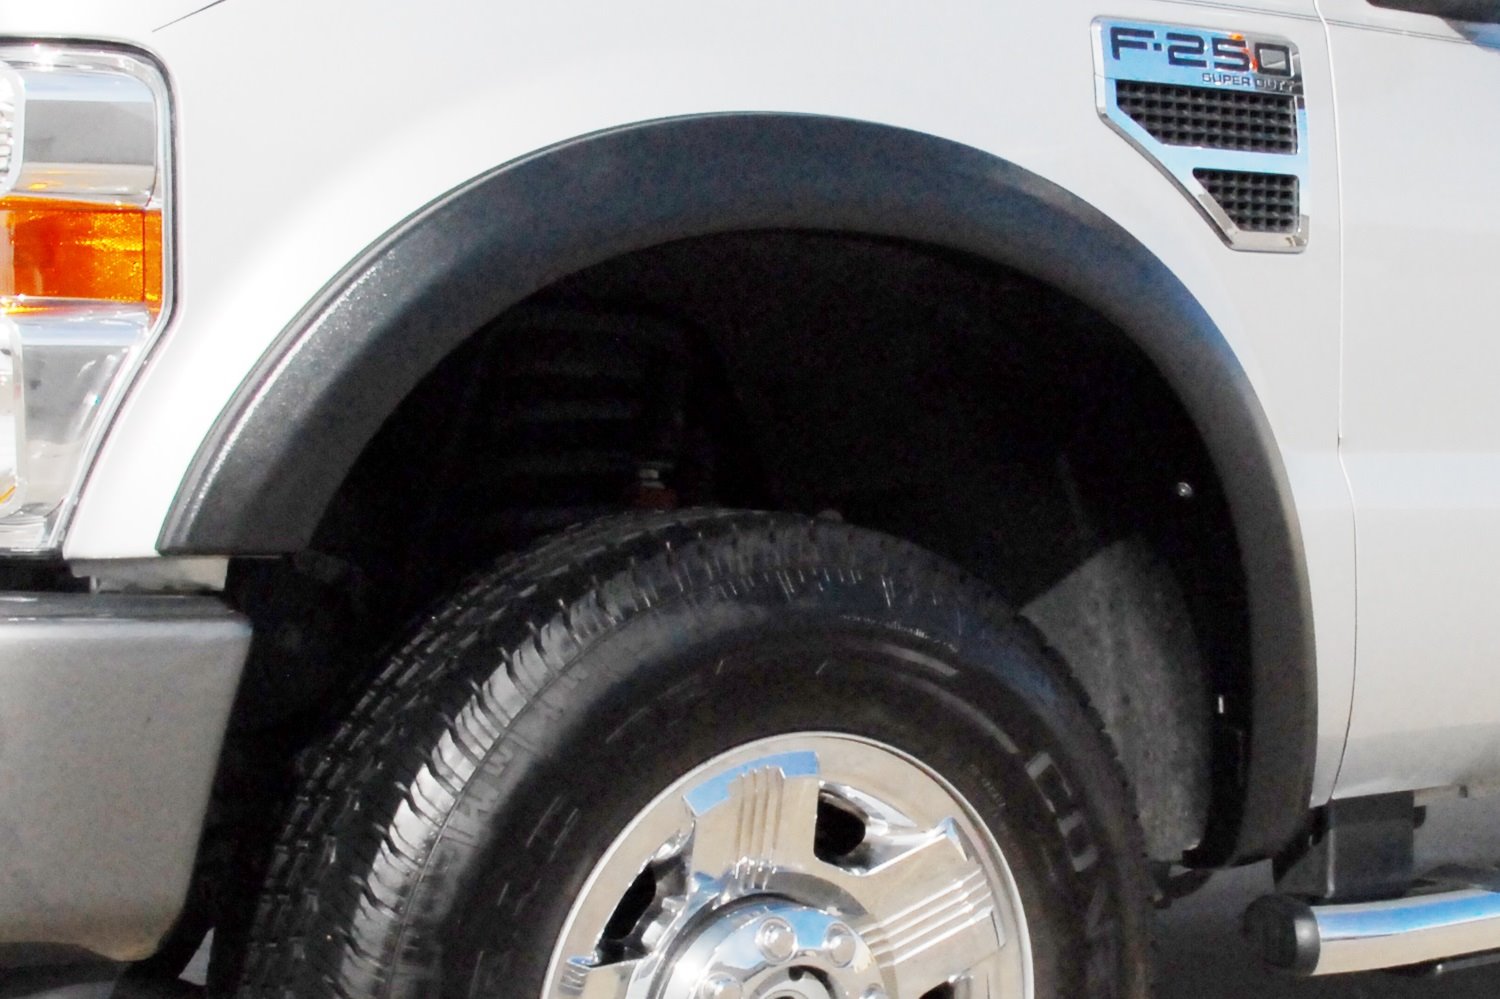 SX Sport-Style Fender Flares 2008-10 Ford F-Series Super Duty